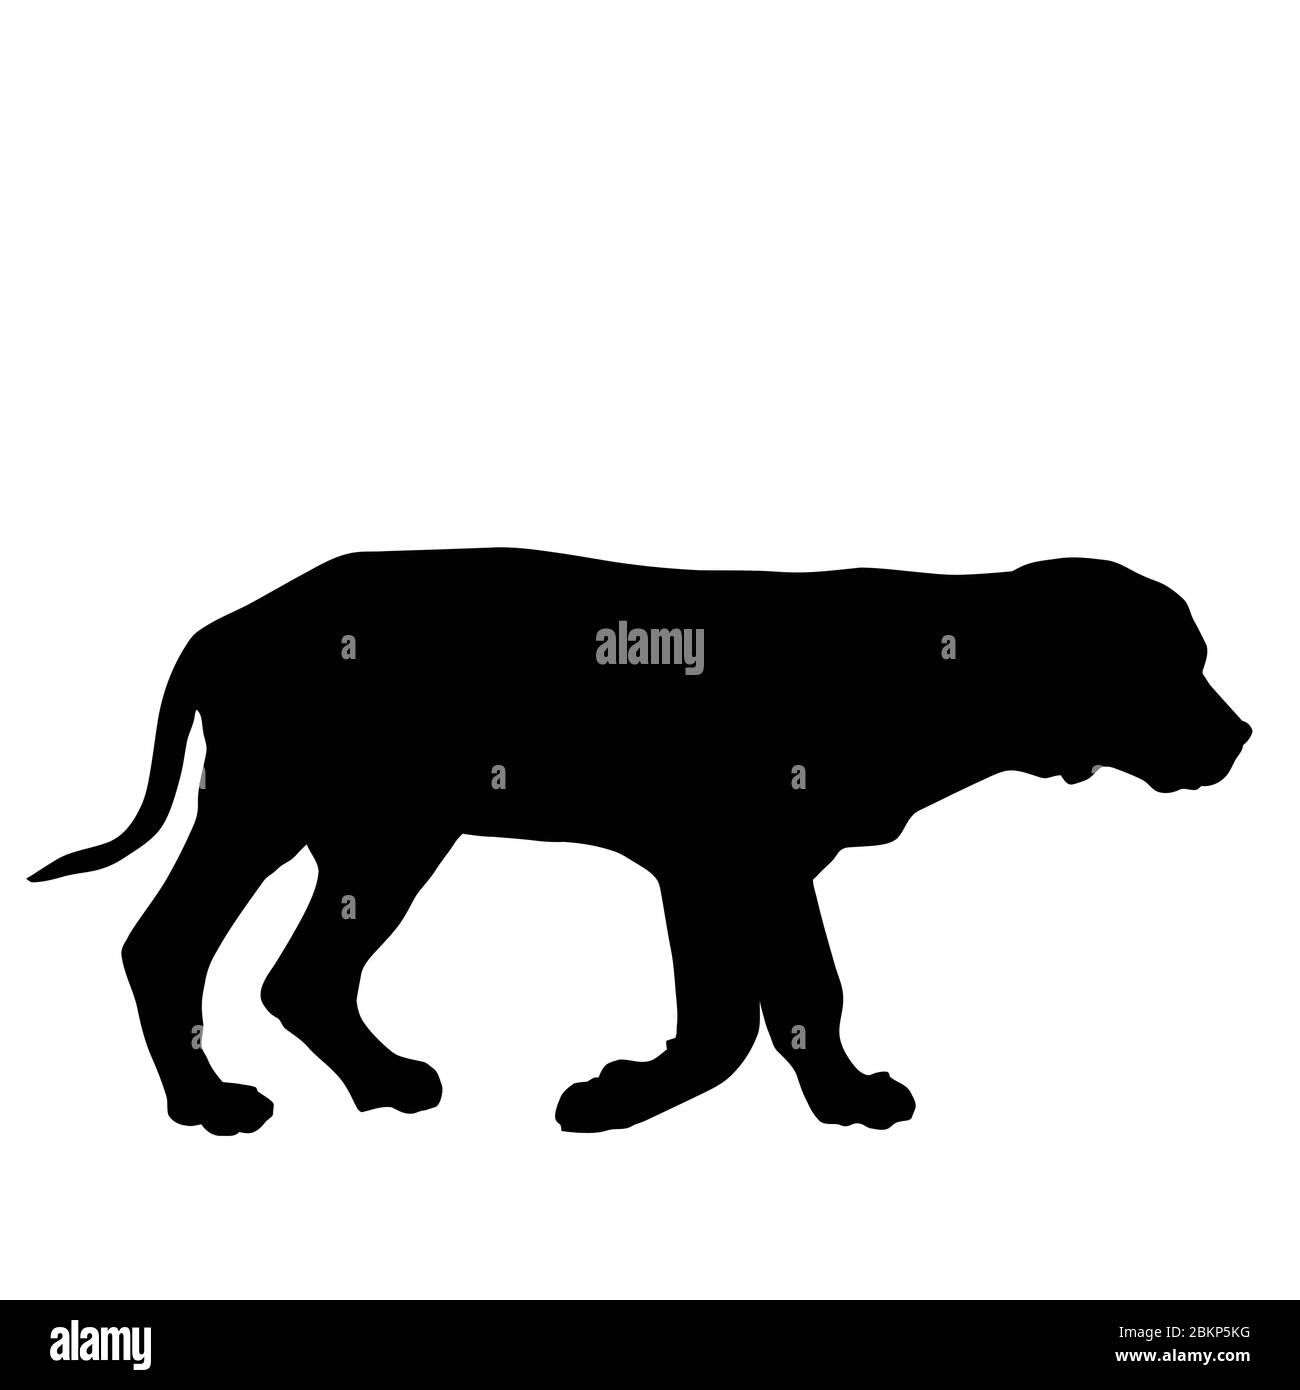 Dog puppy silhouette walking on white background, vector illustration Stock Vector